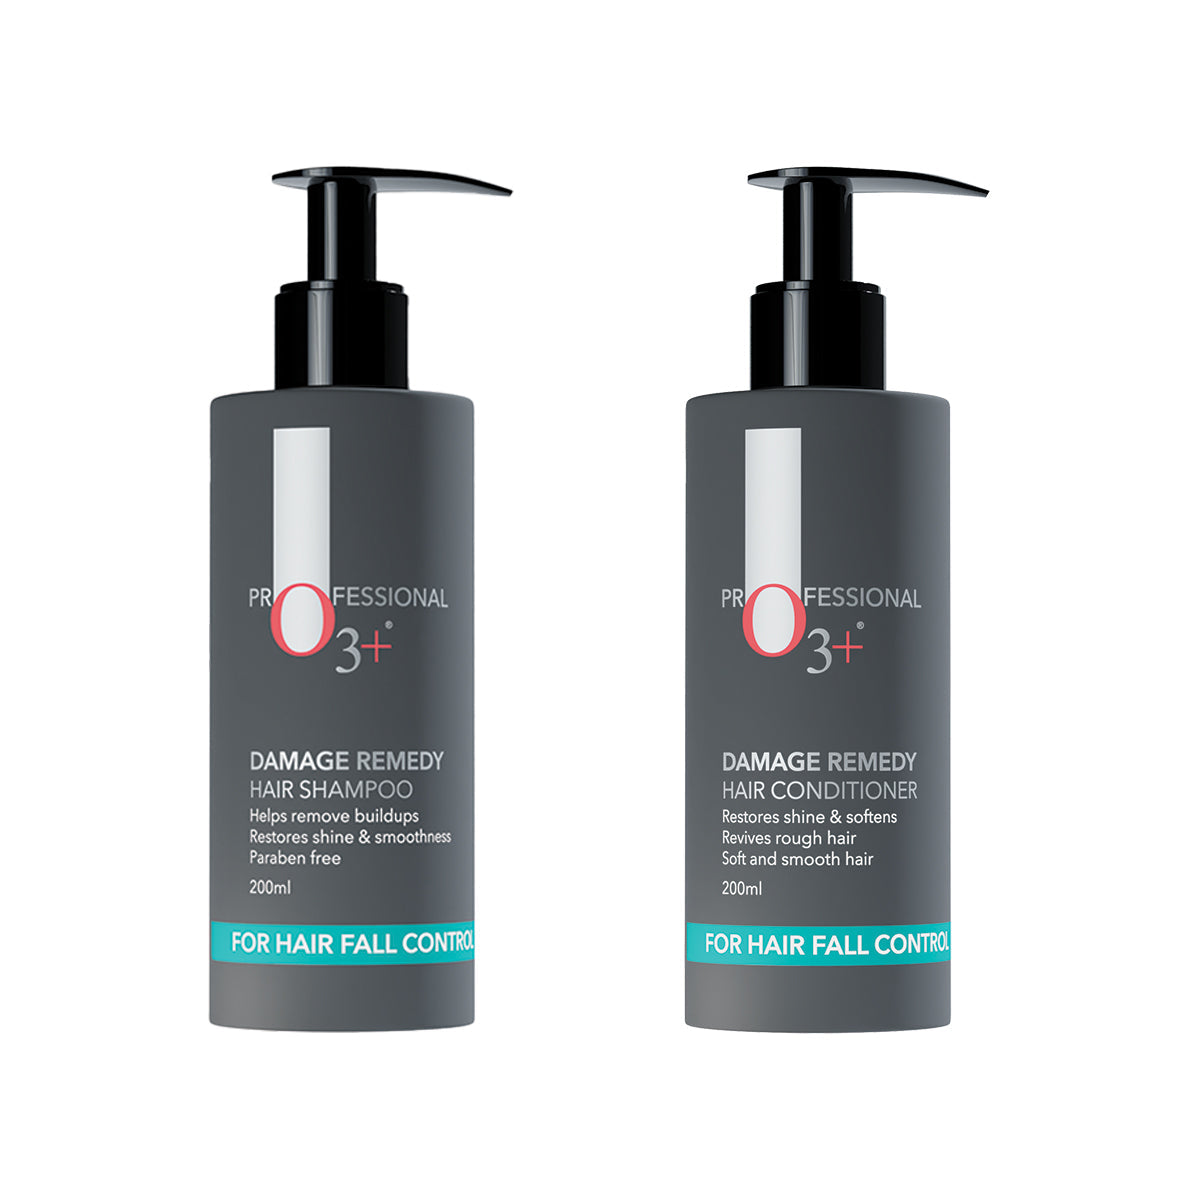 Buy Damage Free Hair Combo Online At Best Price | O3+